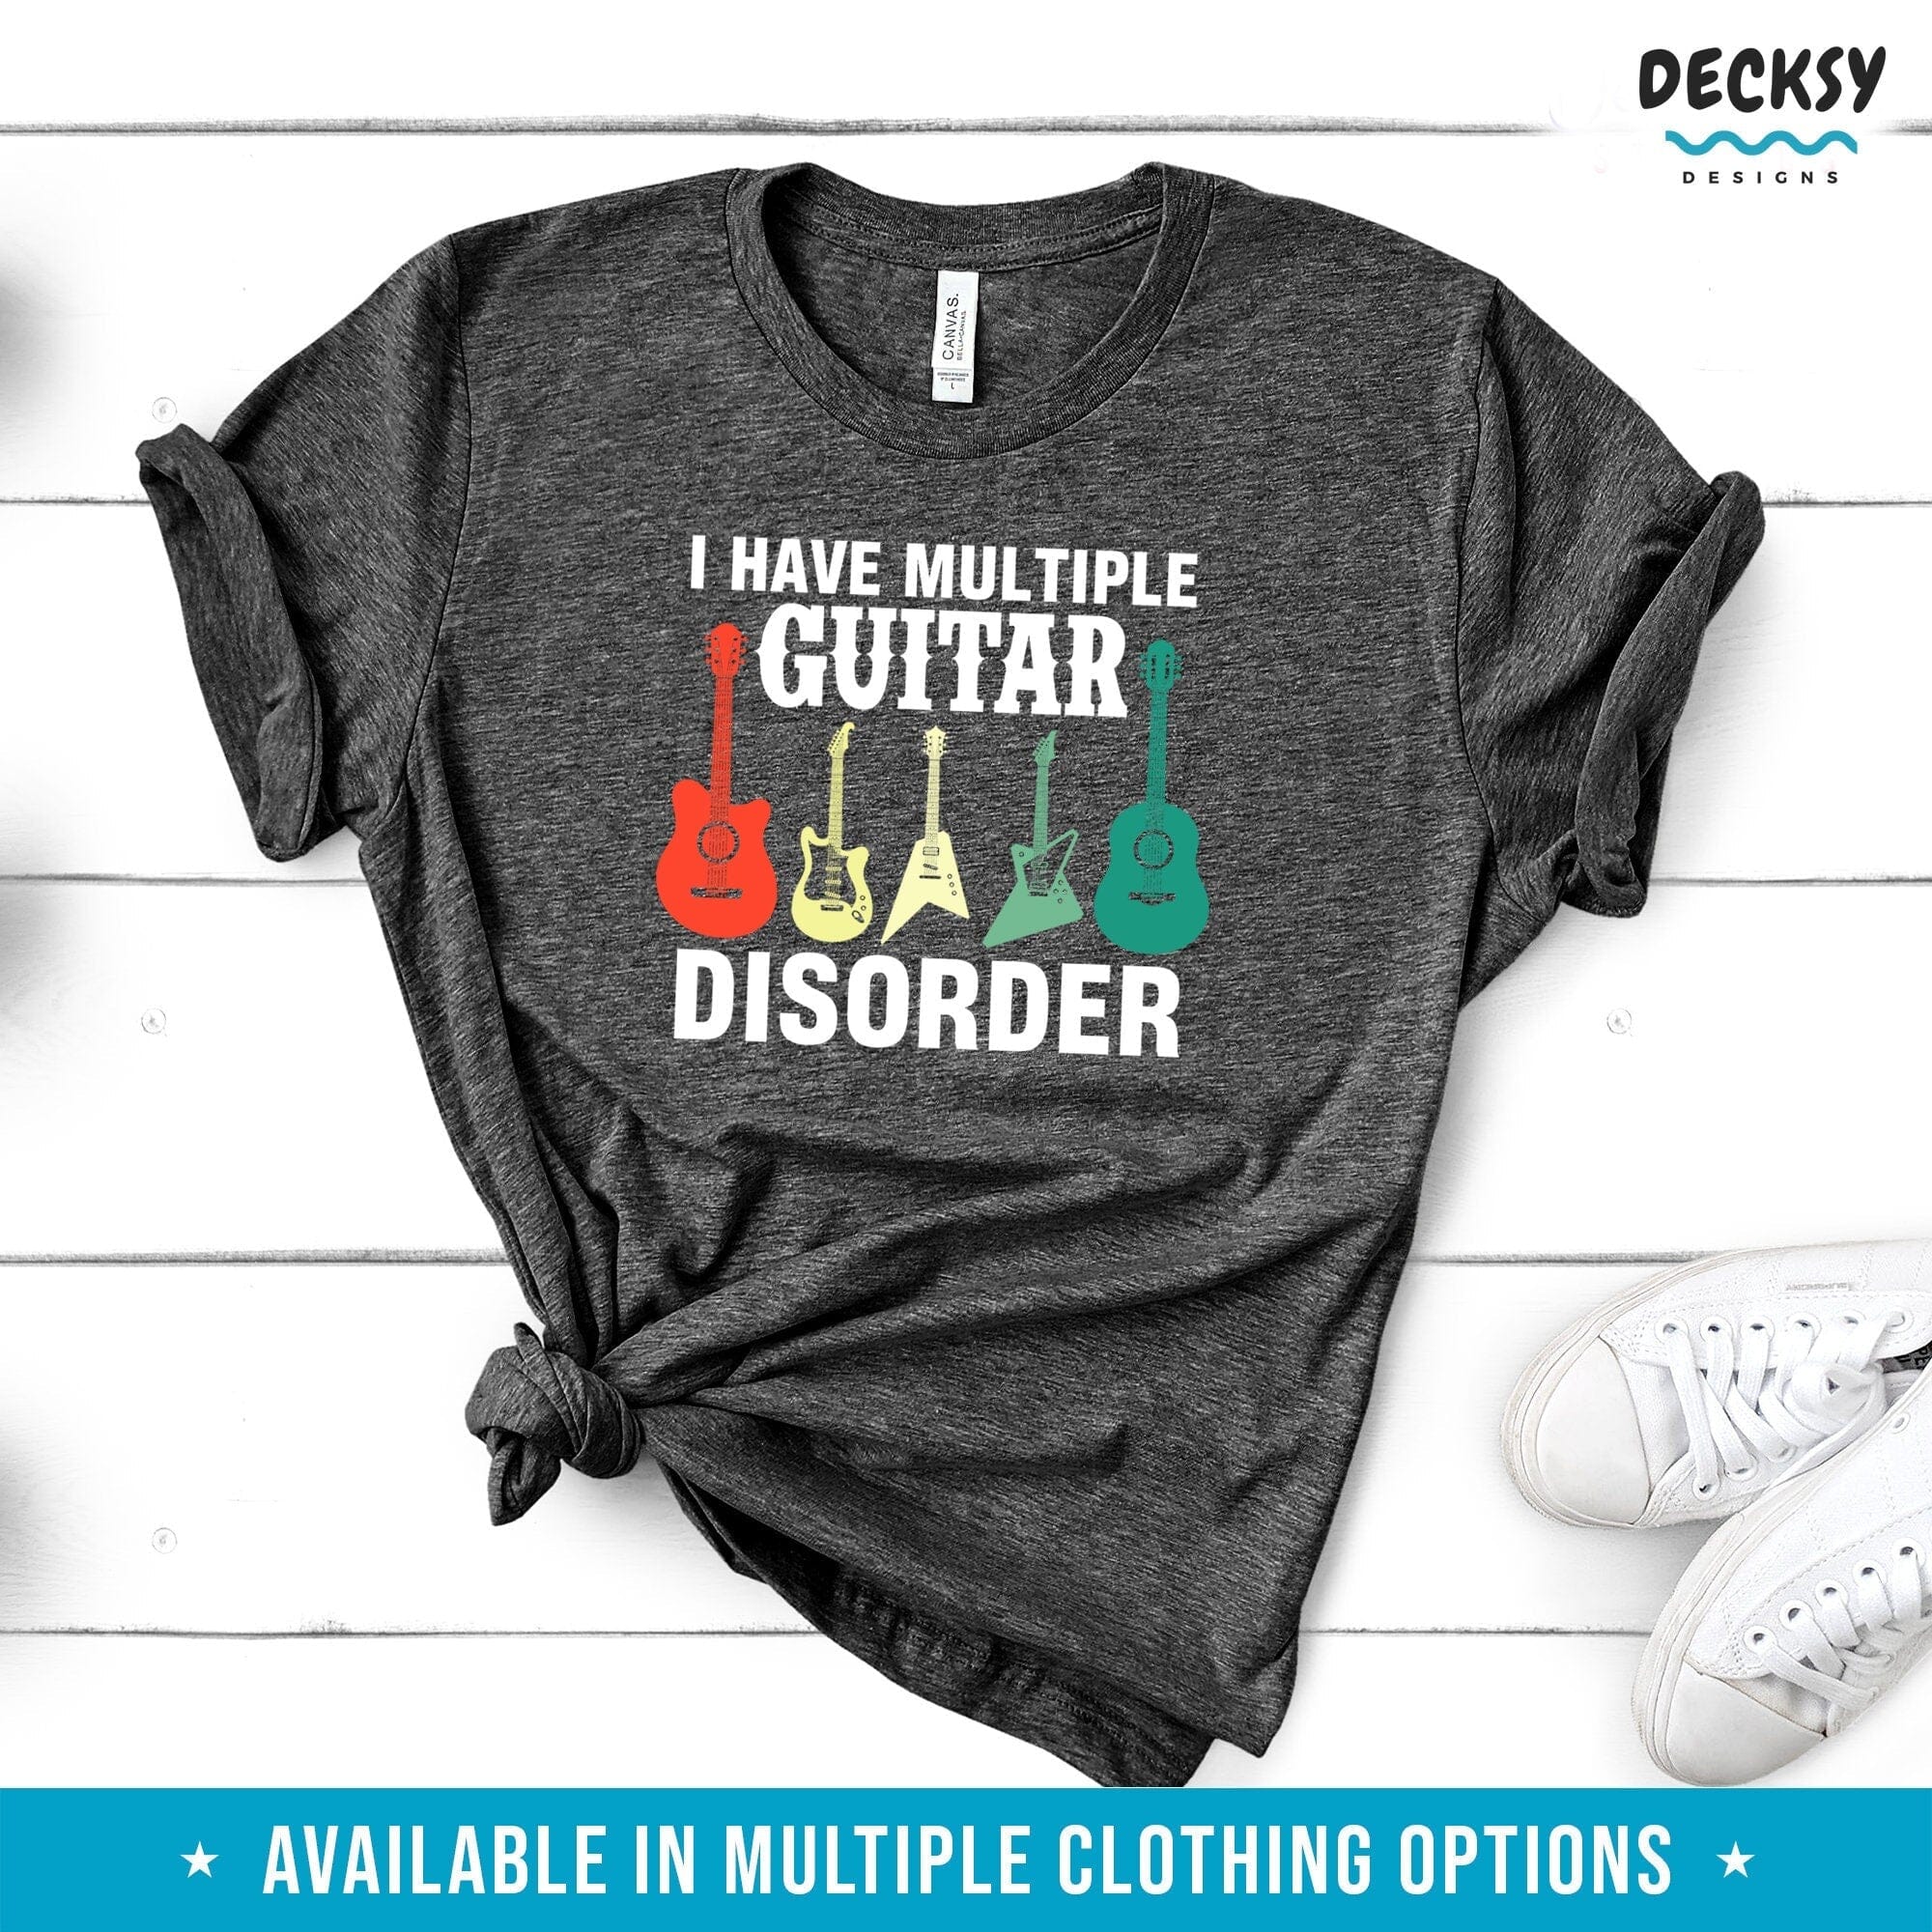 Guitar Player Shirt, Gift for Musician-Clothing:Gender-Neutral Adult Clothing:Tops & Tees:T-shirts:Graphic Tees-DecksyDesigns